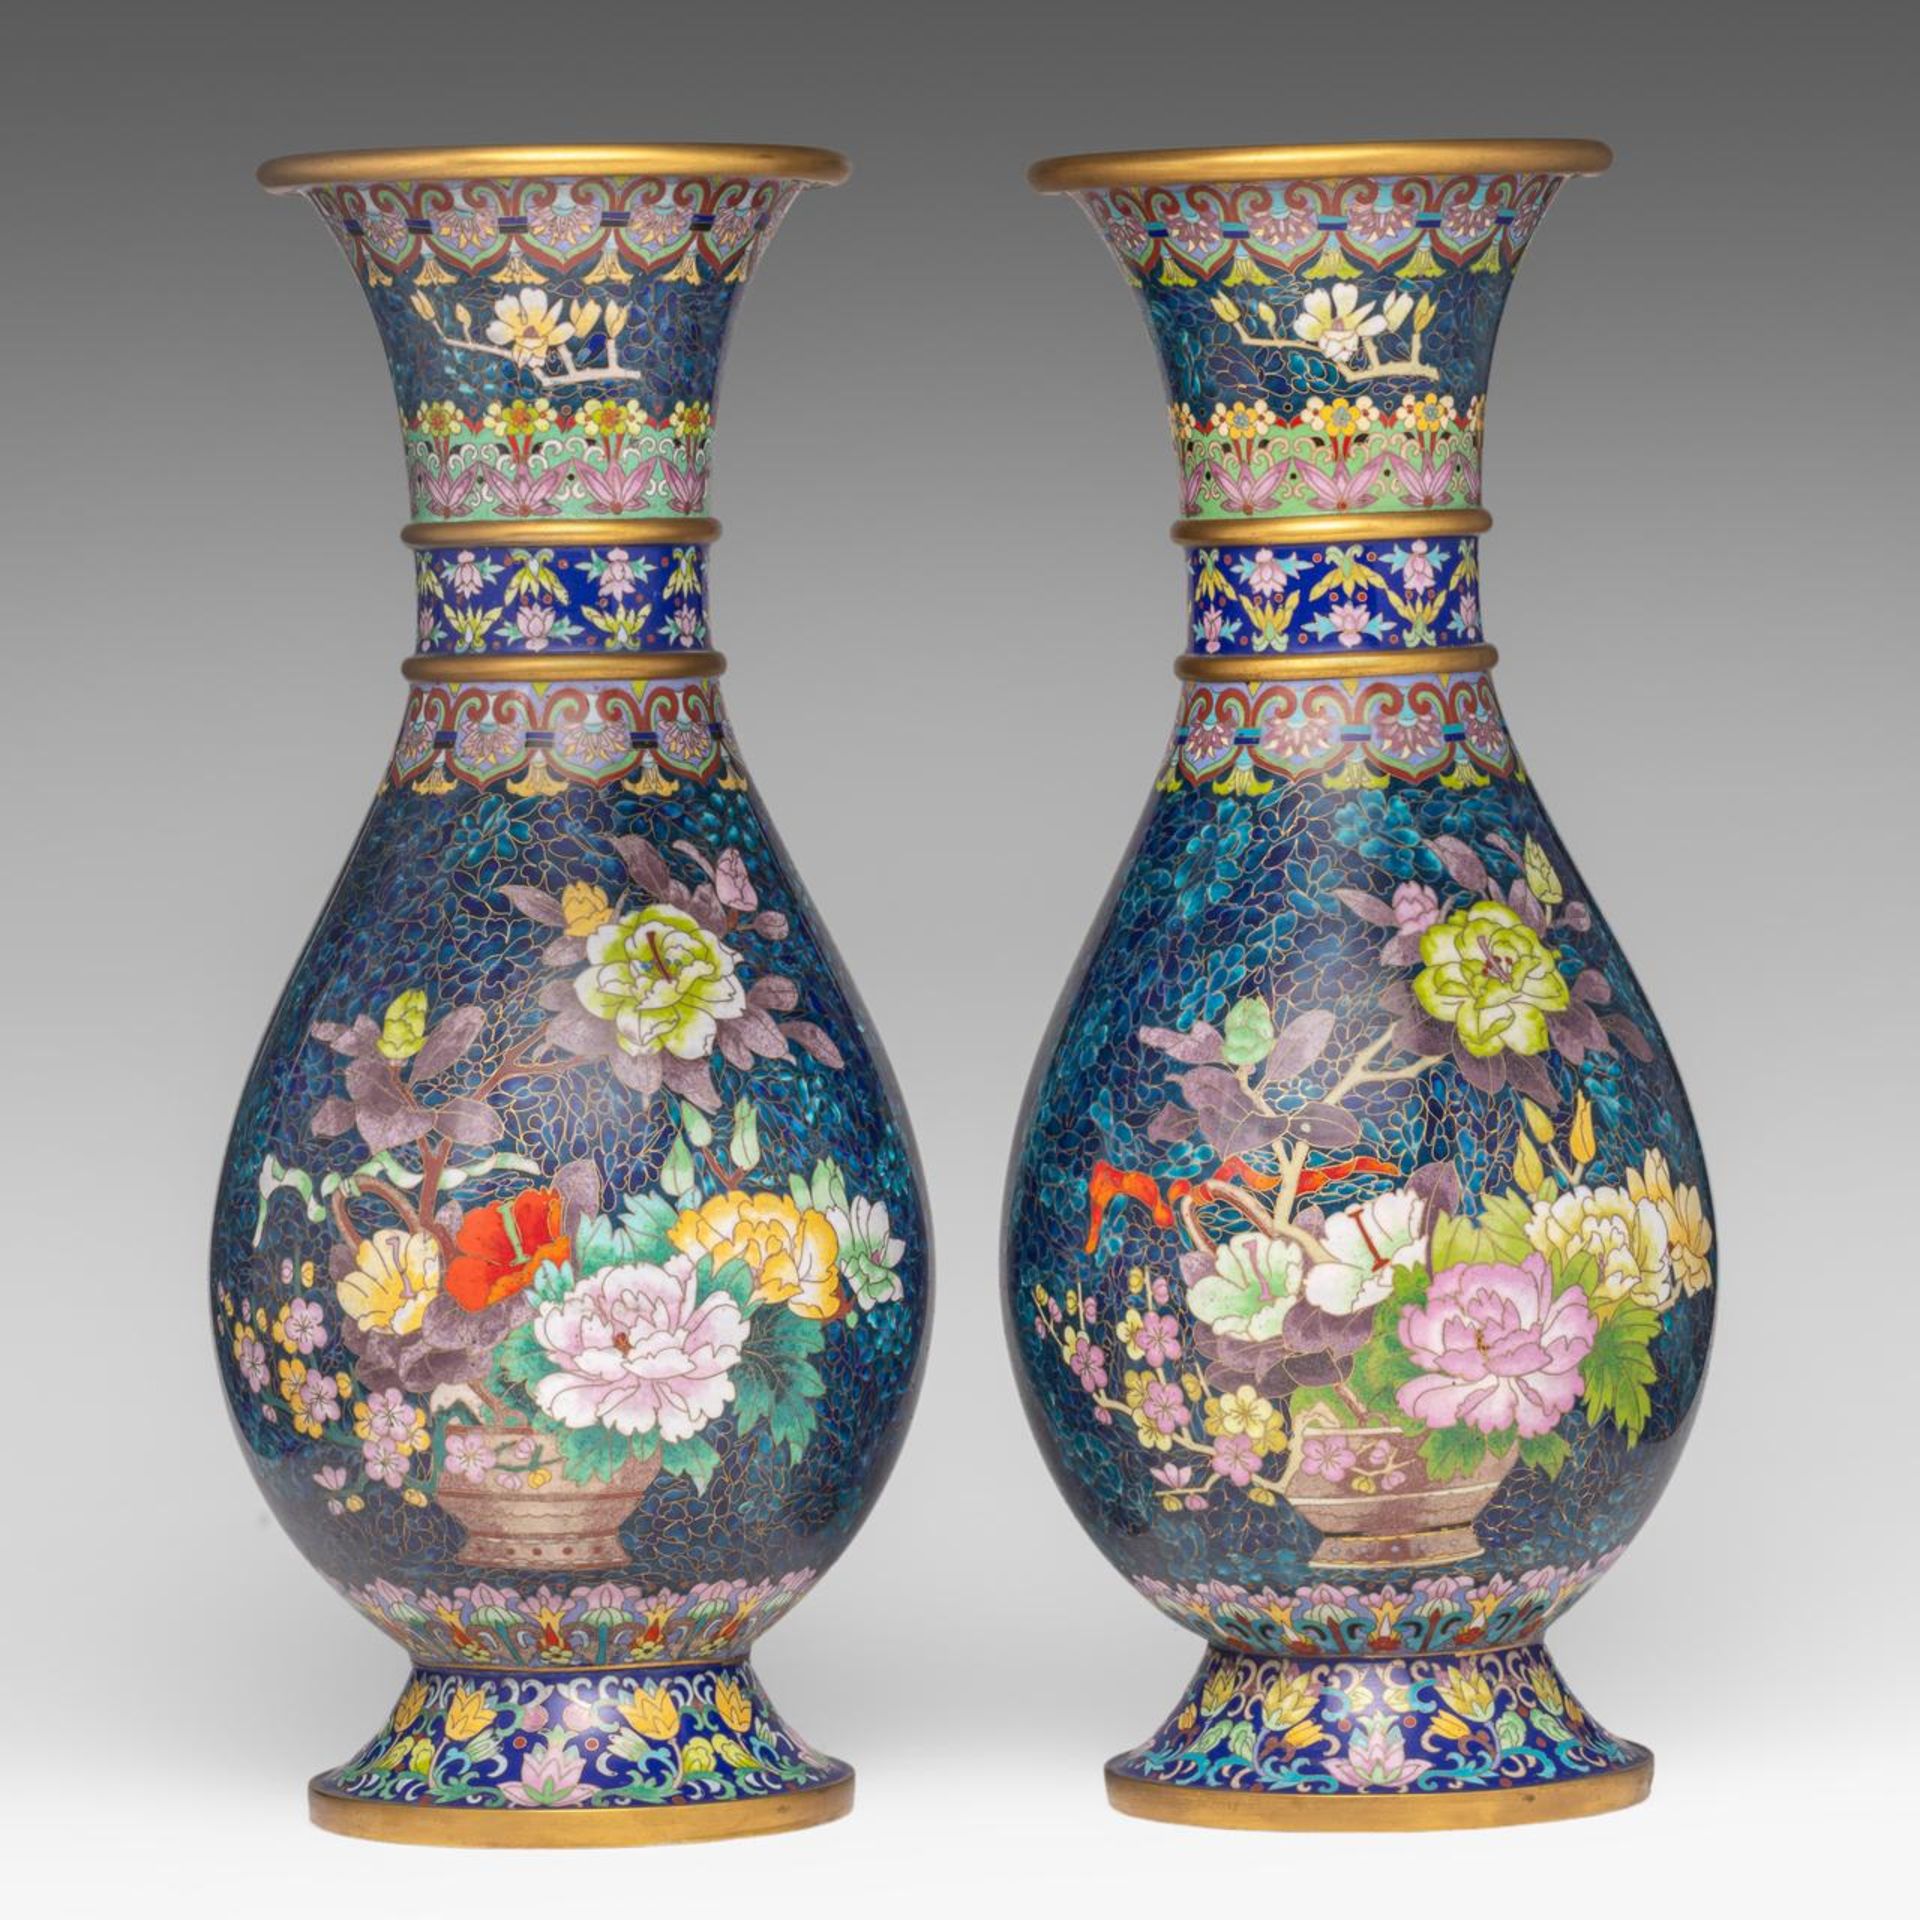 A pair of Chinese cloisonne enamelled 'Flower basket' vases, 20thC, H 52,5 cm - Image 3 of 6